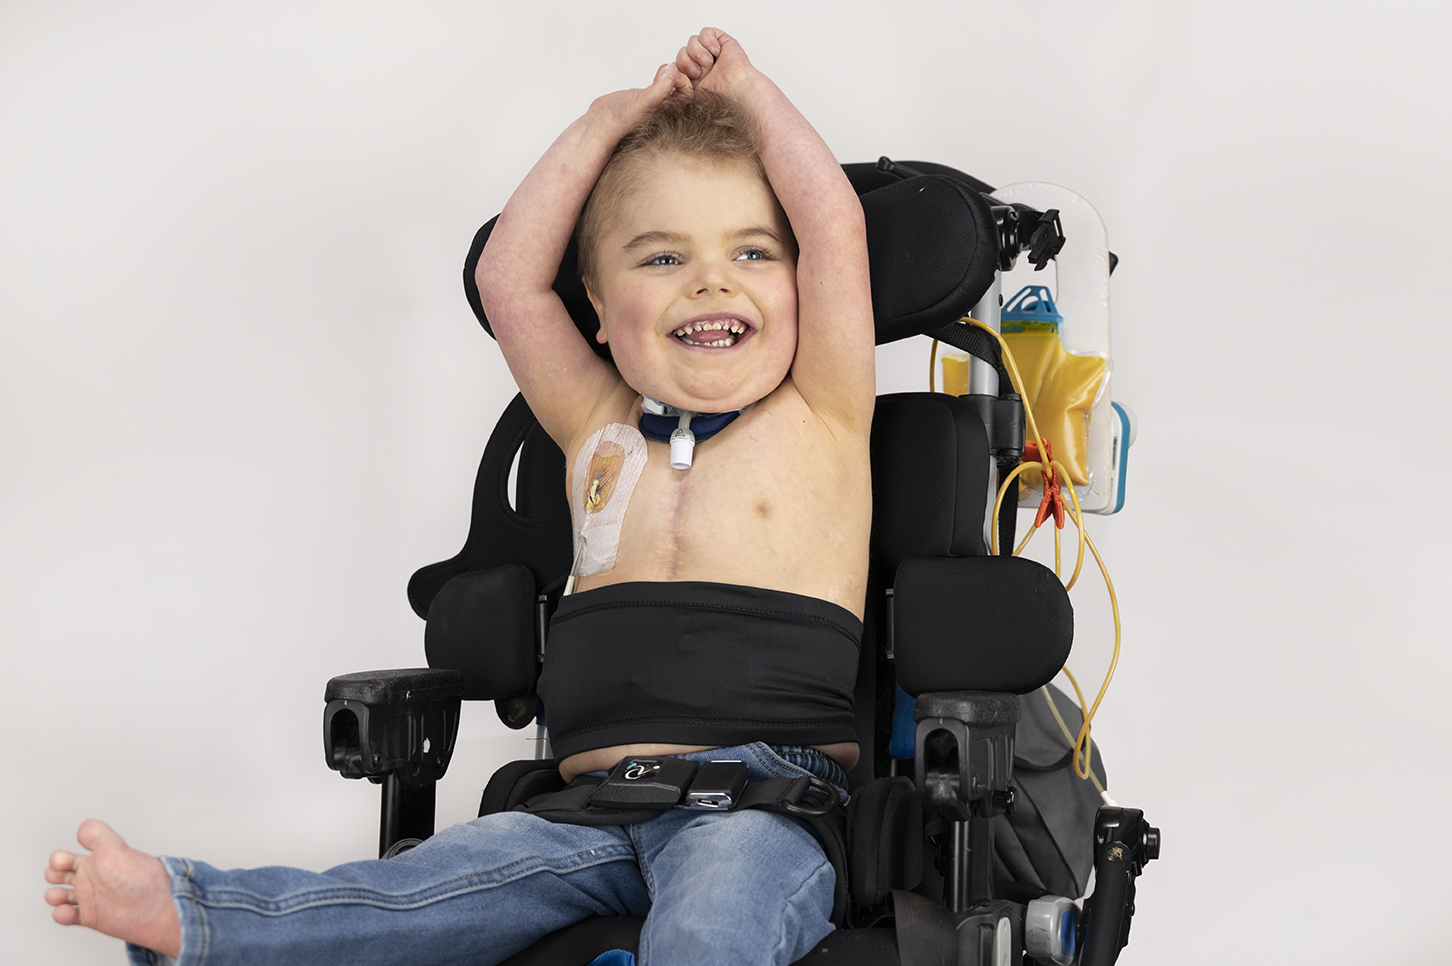 Child sitting in wheelchair wearing black waistband with feeding tube visible 